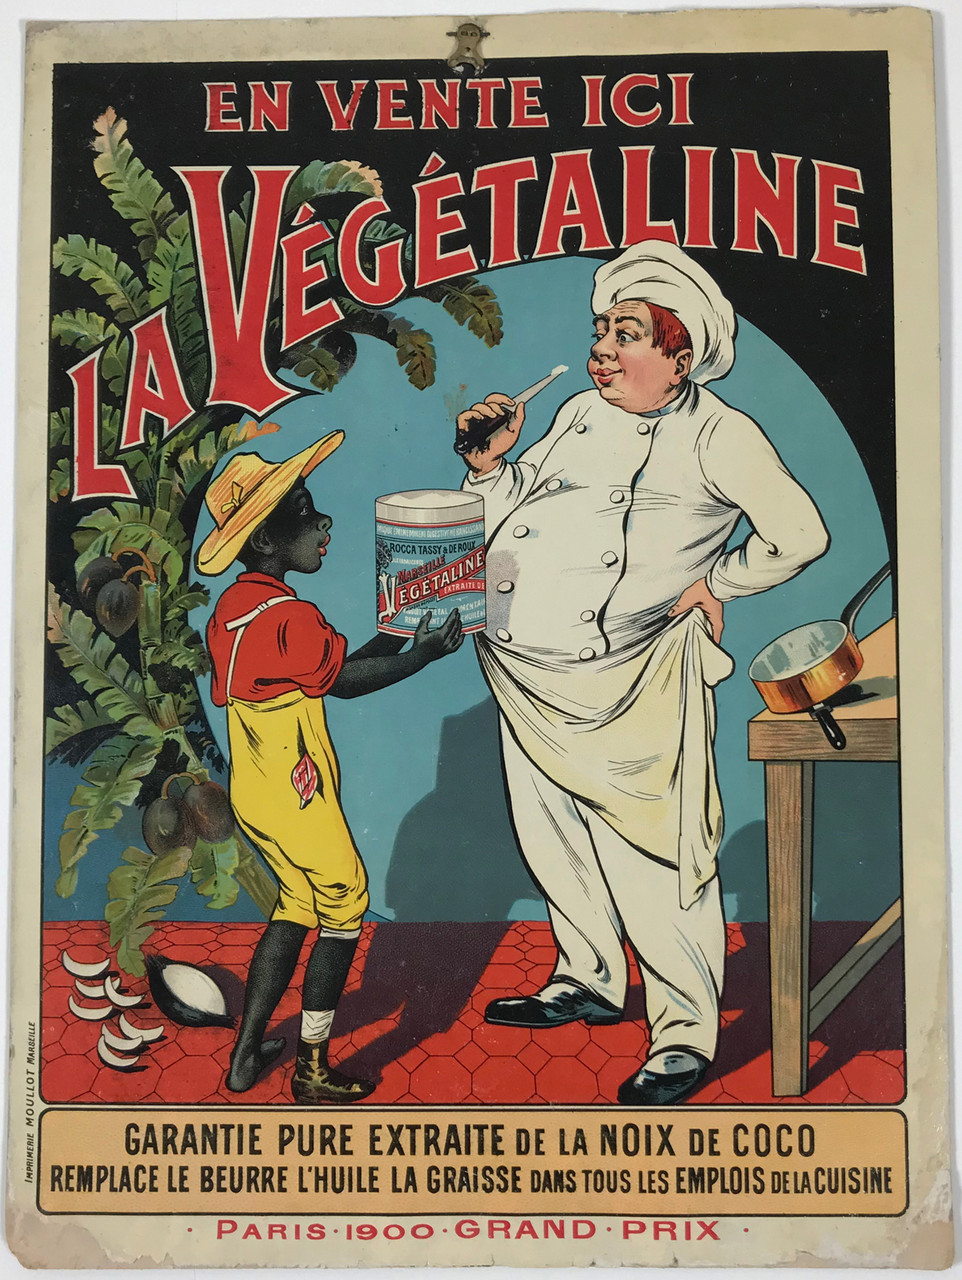 La Vegetaline Extraite by Eugeneo Oge Original 1900 Vintage French Food Advertisement Antique Store Display Stone Lithograph Poster on Carton.